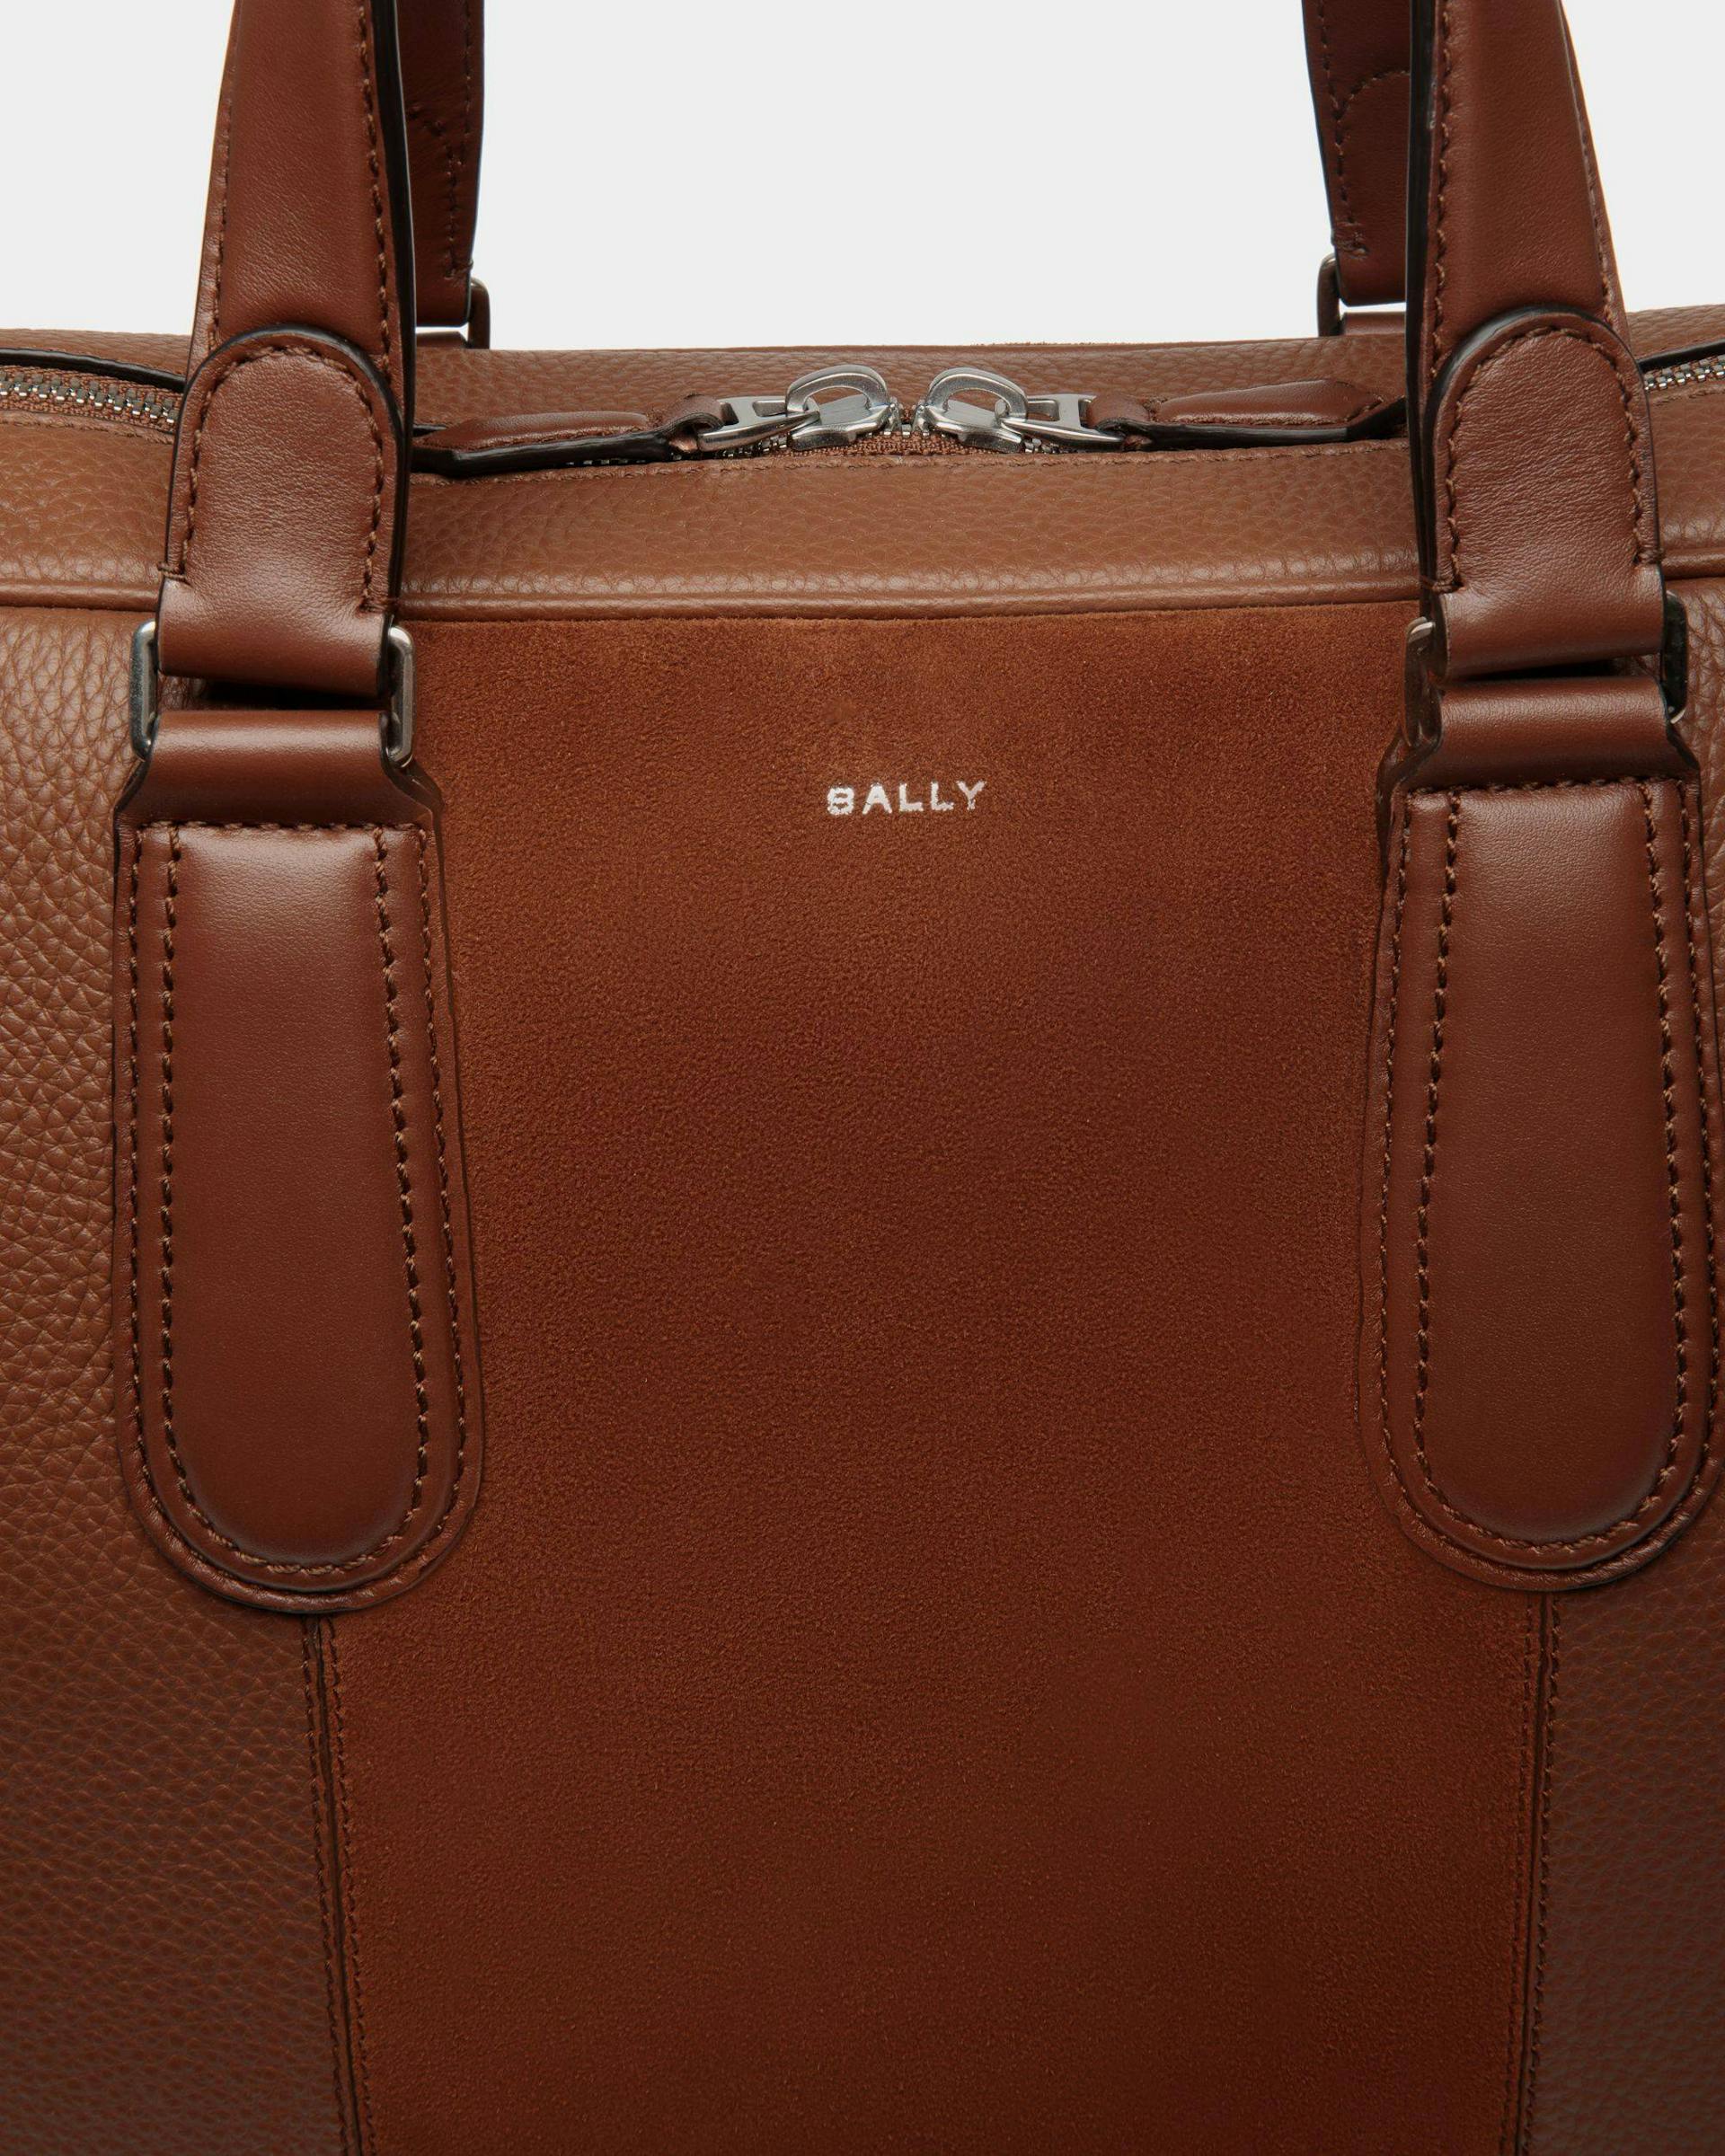 Men's Spin Briefcase in Brown Leather | Bally | Still Life Detail